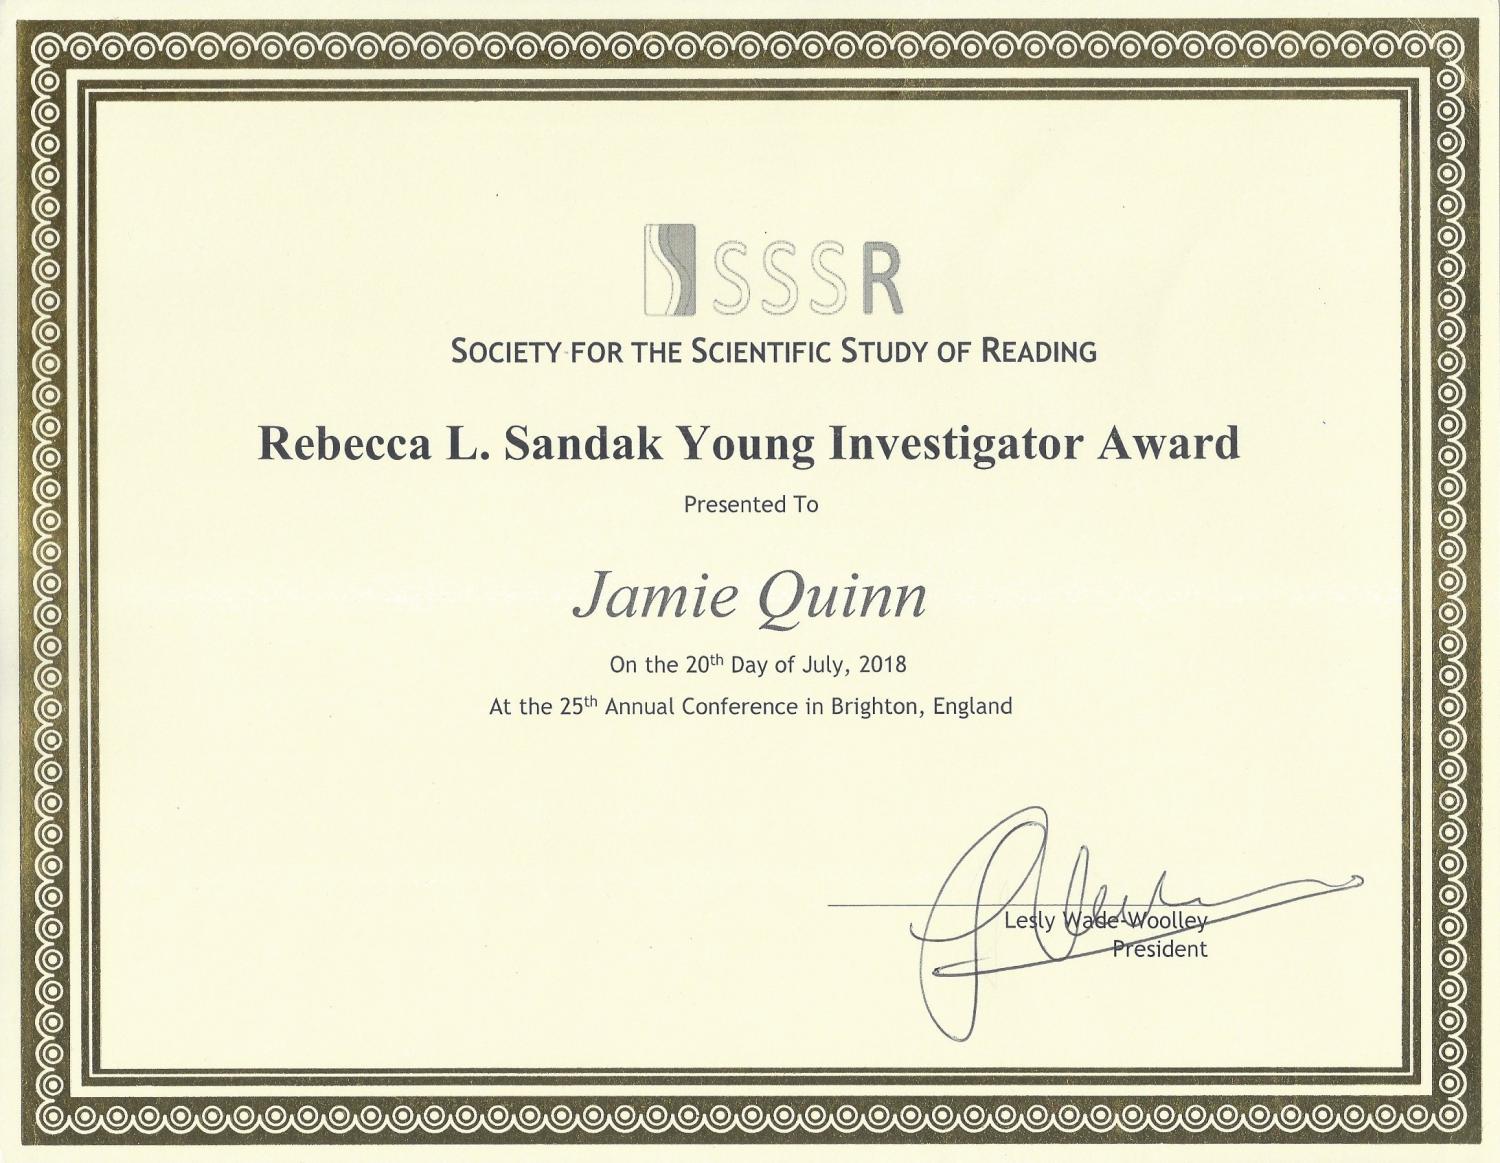 Society for the Scientific Study of Reading award